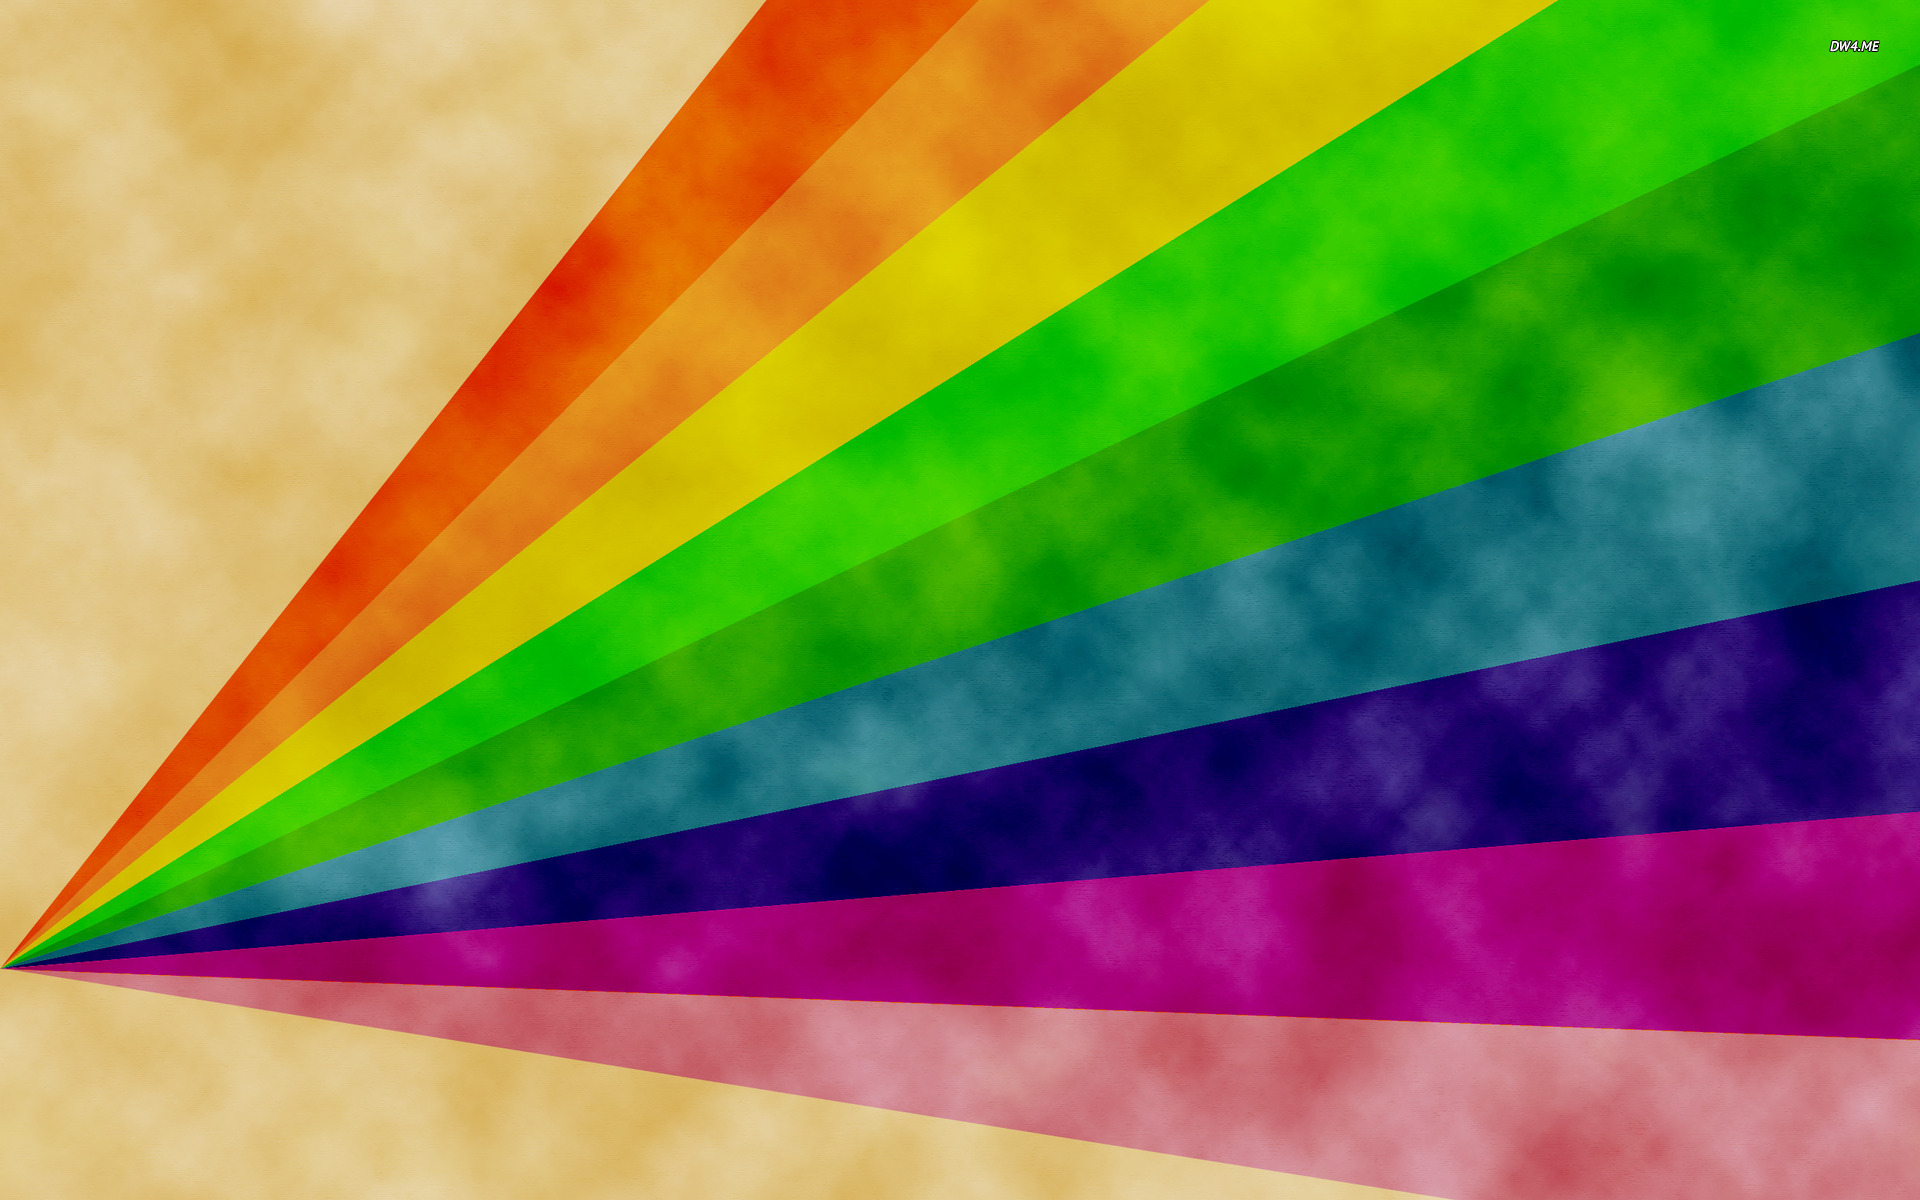 Rainbow on paper wallpaper   Abstract wallpapers   150